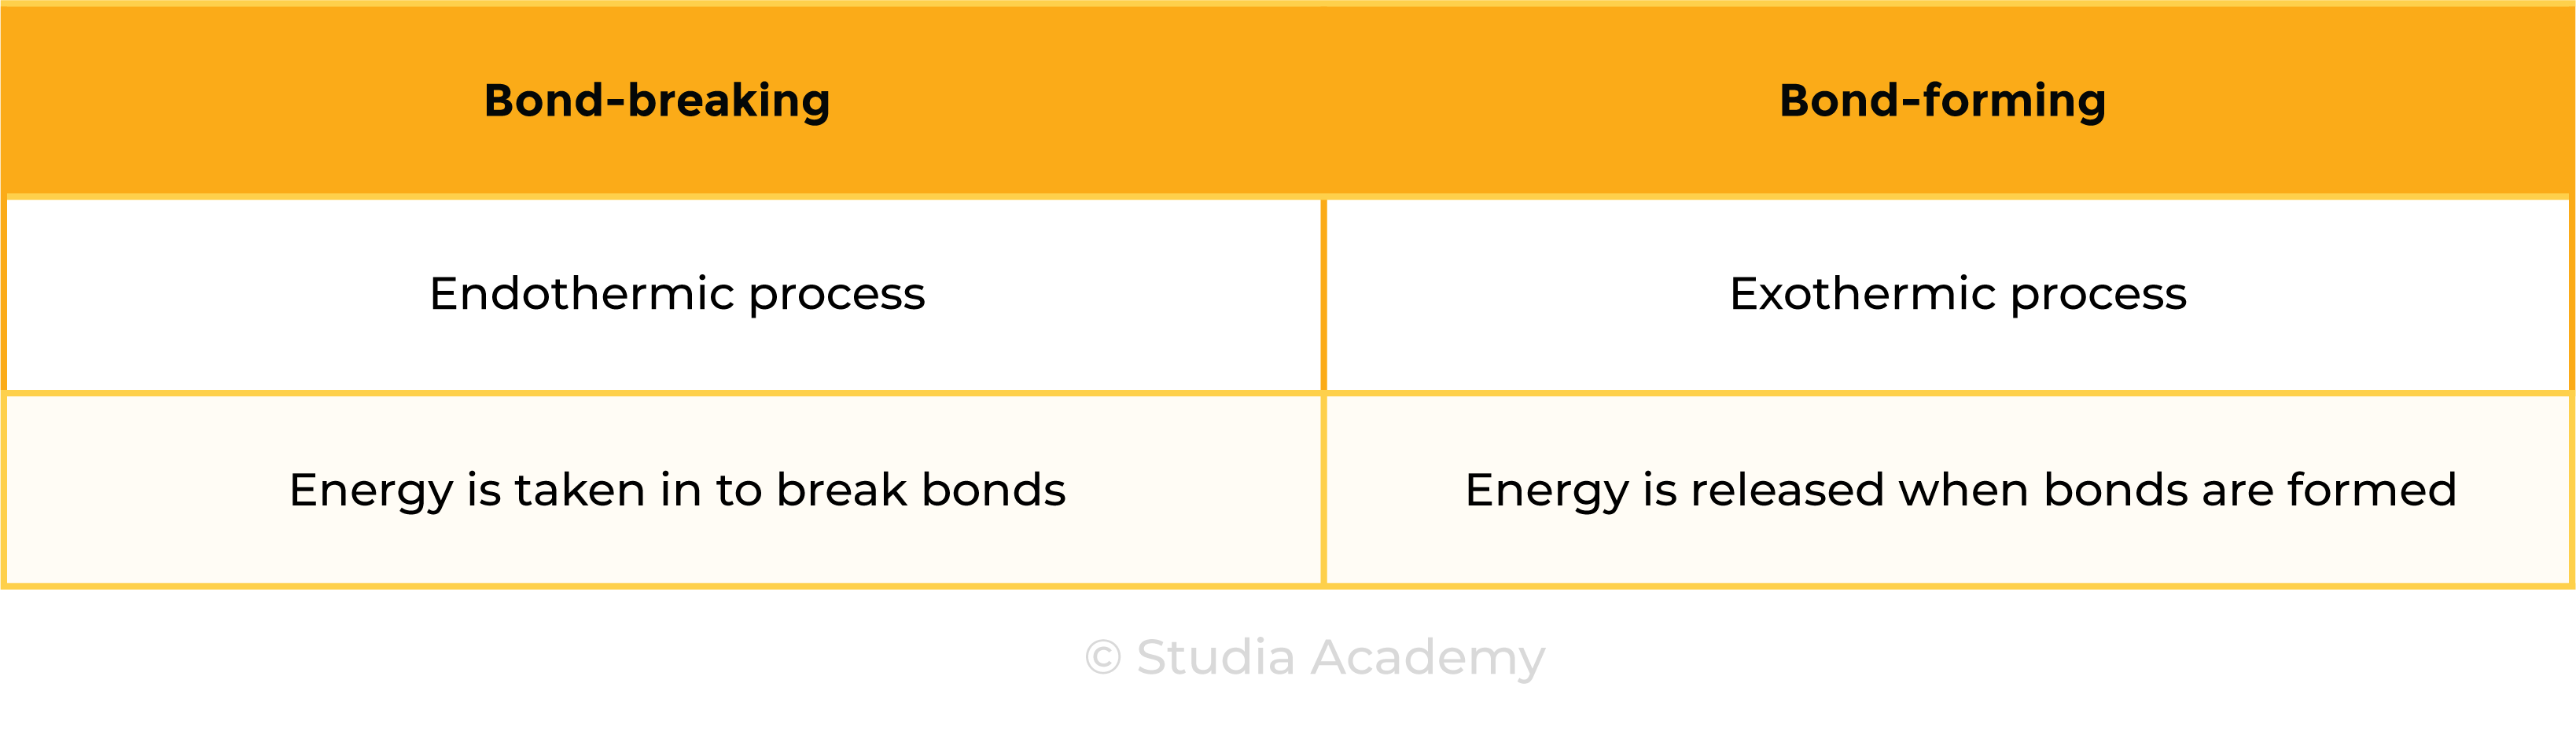 edexcel_igcse_chemistry_topic 18 tables_energetics_003_exothermic and endothermic in terms of bonds